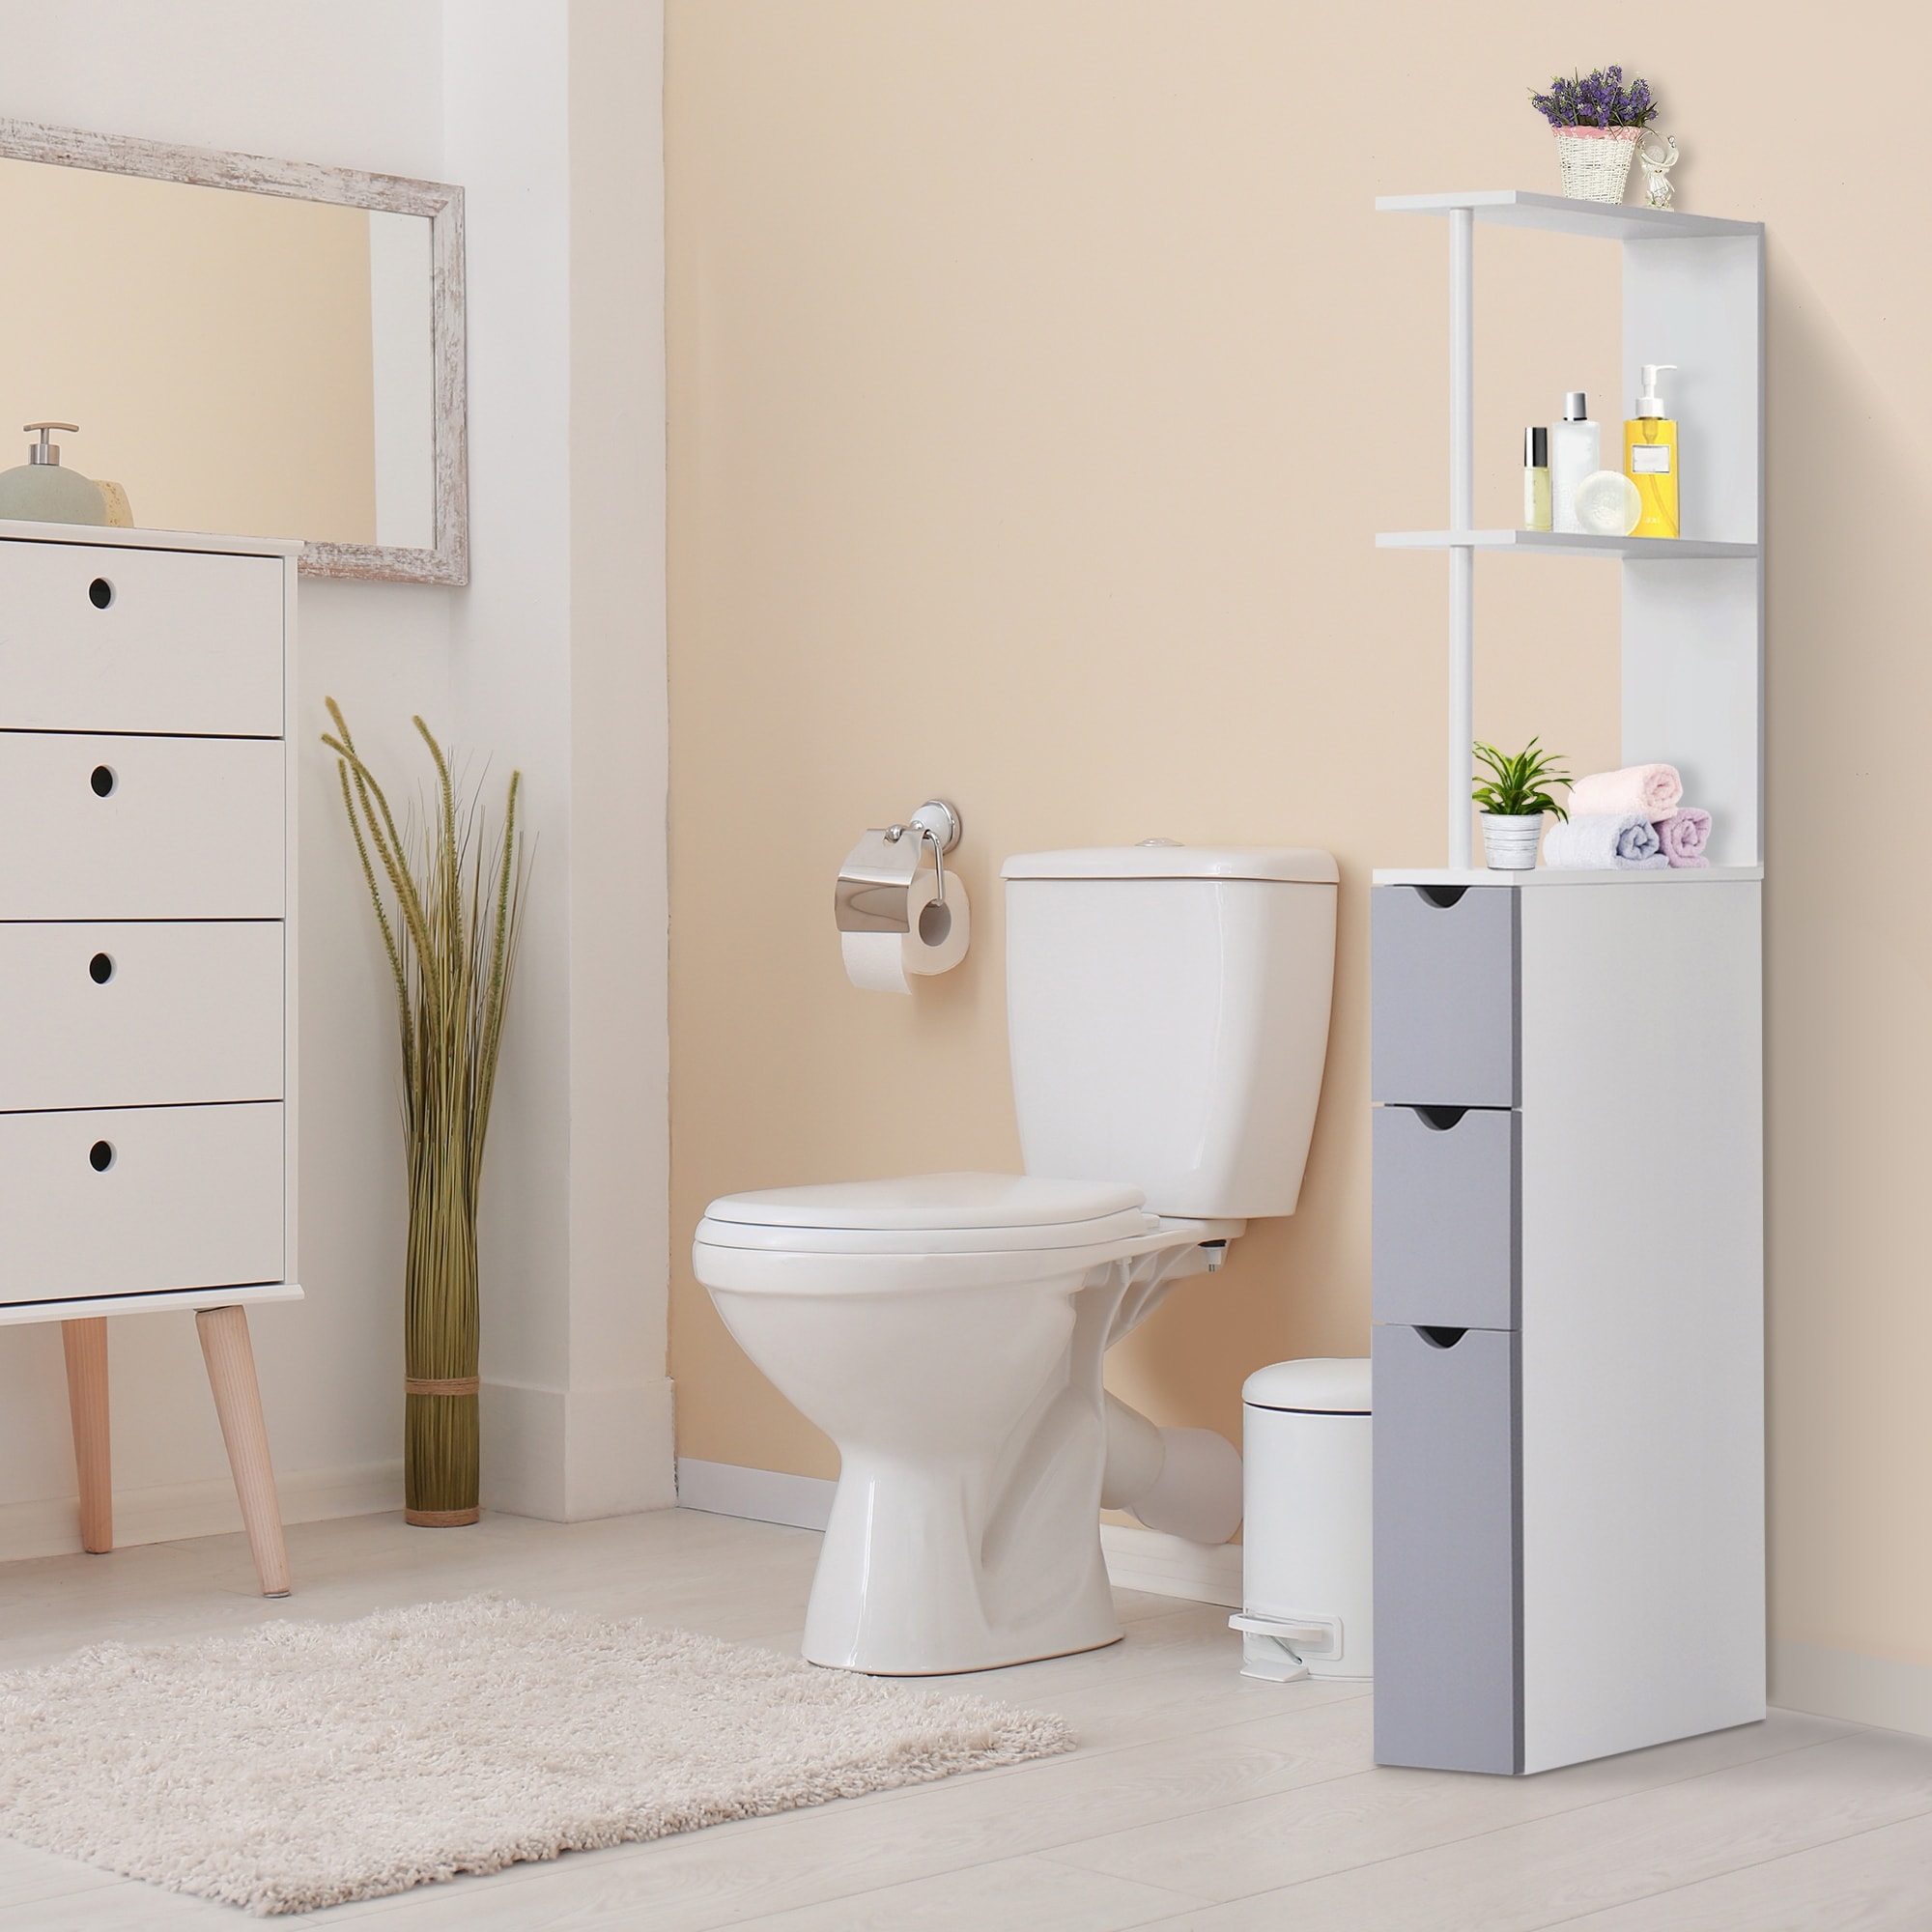 https://ak1.ostkcdn.com/images/products/is/images/direct/7c1ba0dbdc298b2d48ce68e2be4281d4dbf47ecd/Bathroom-Tower-Storage-Cabinet.jpg